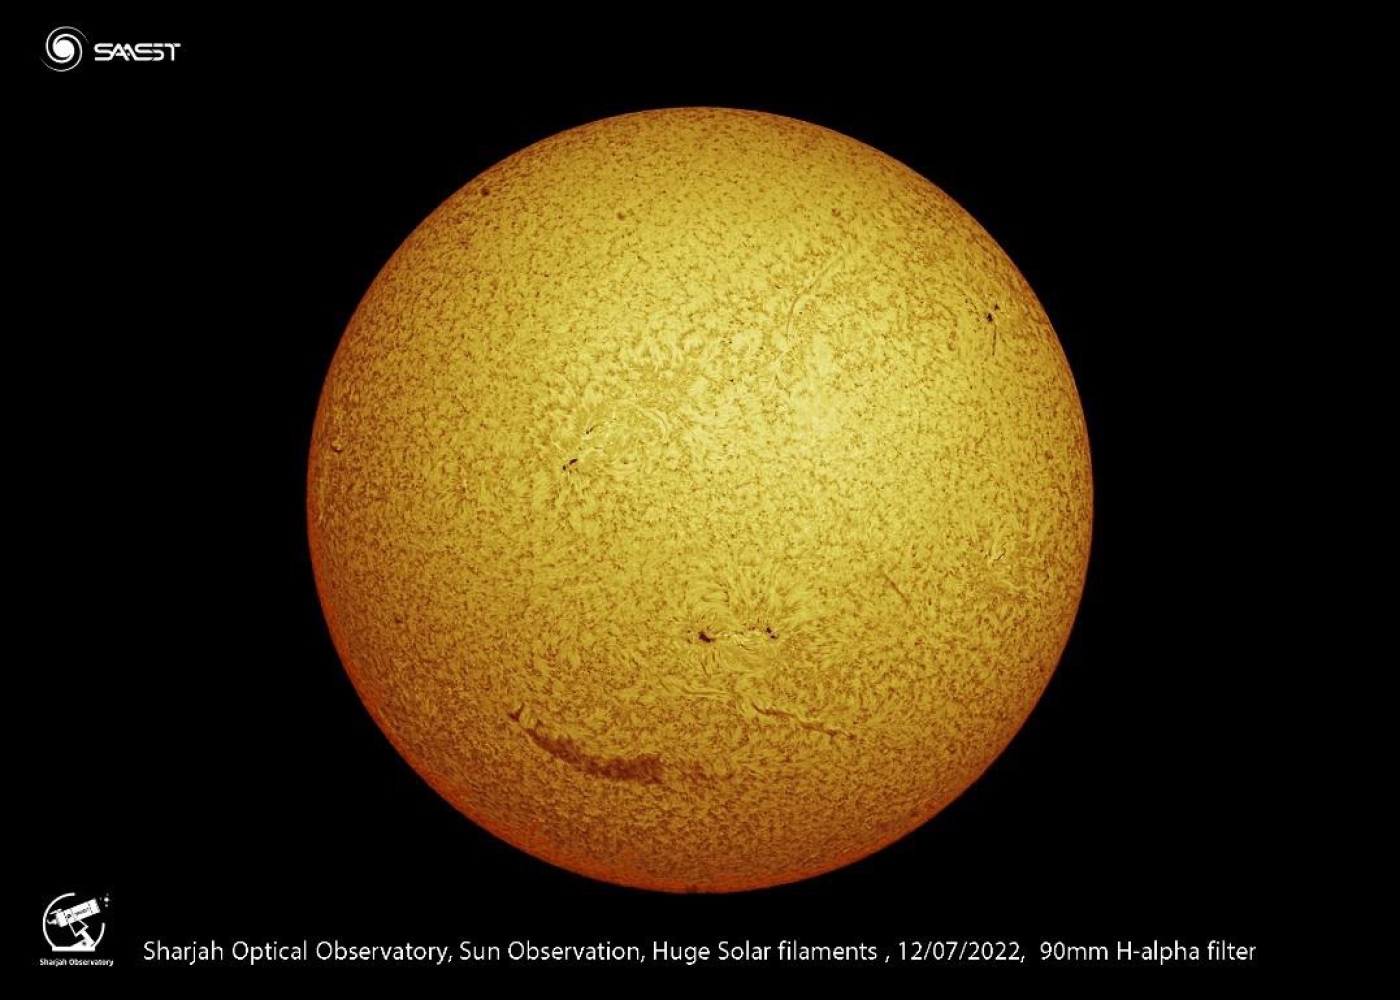 Huge Magnetic Filament Observed on the Sun’s Surface on July 12, 2022